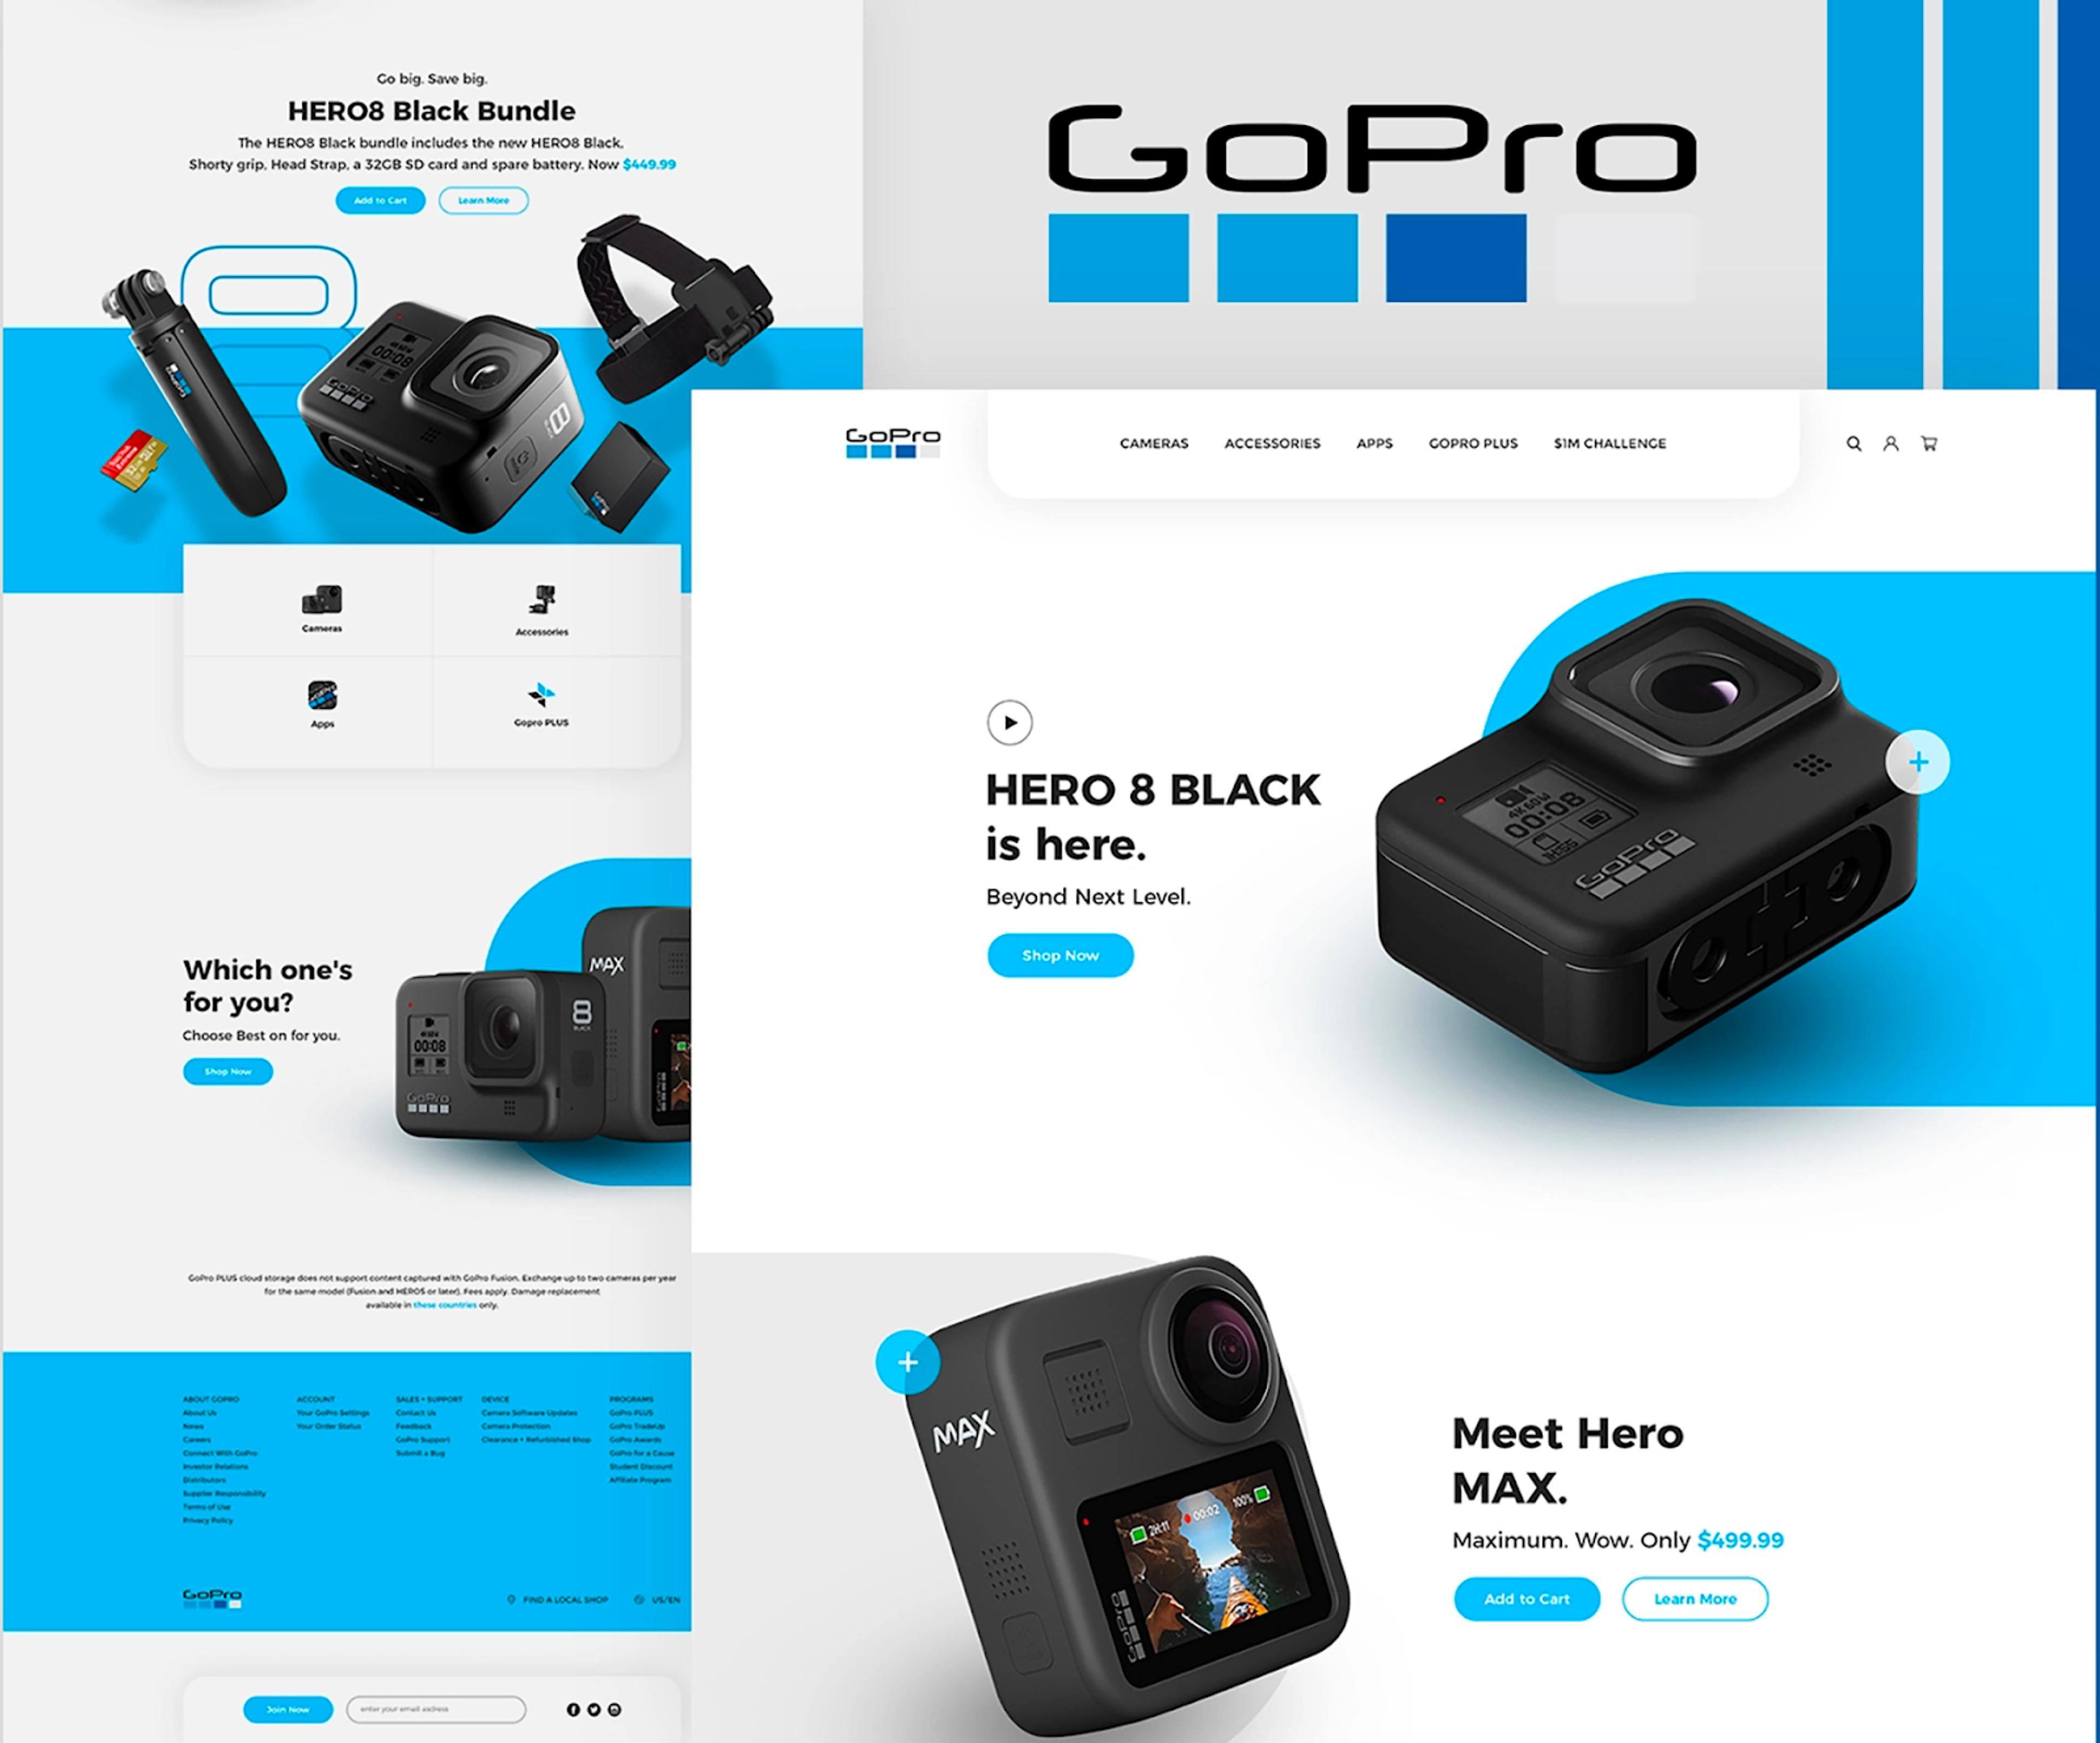 eCommerce Landing Page